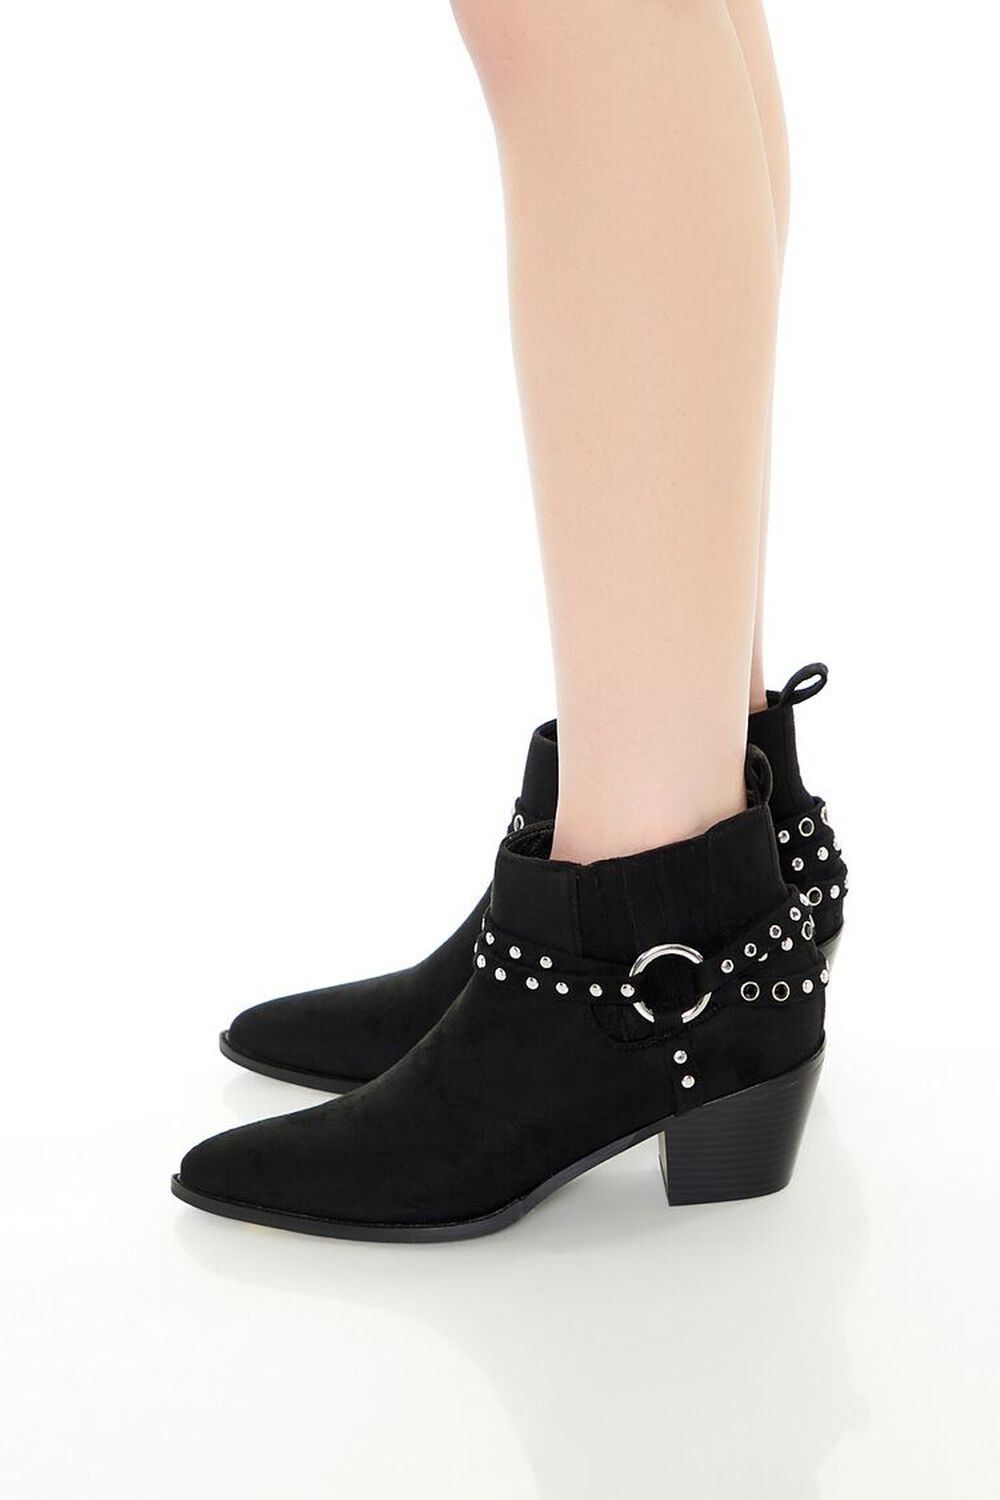 BLACK Studded Faux Suede Booties, image 2